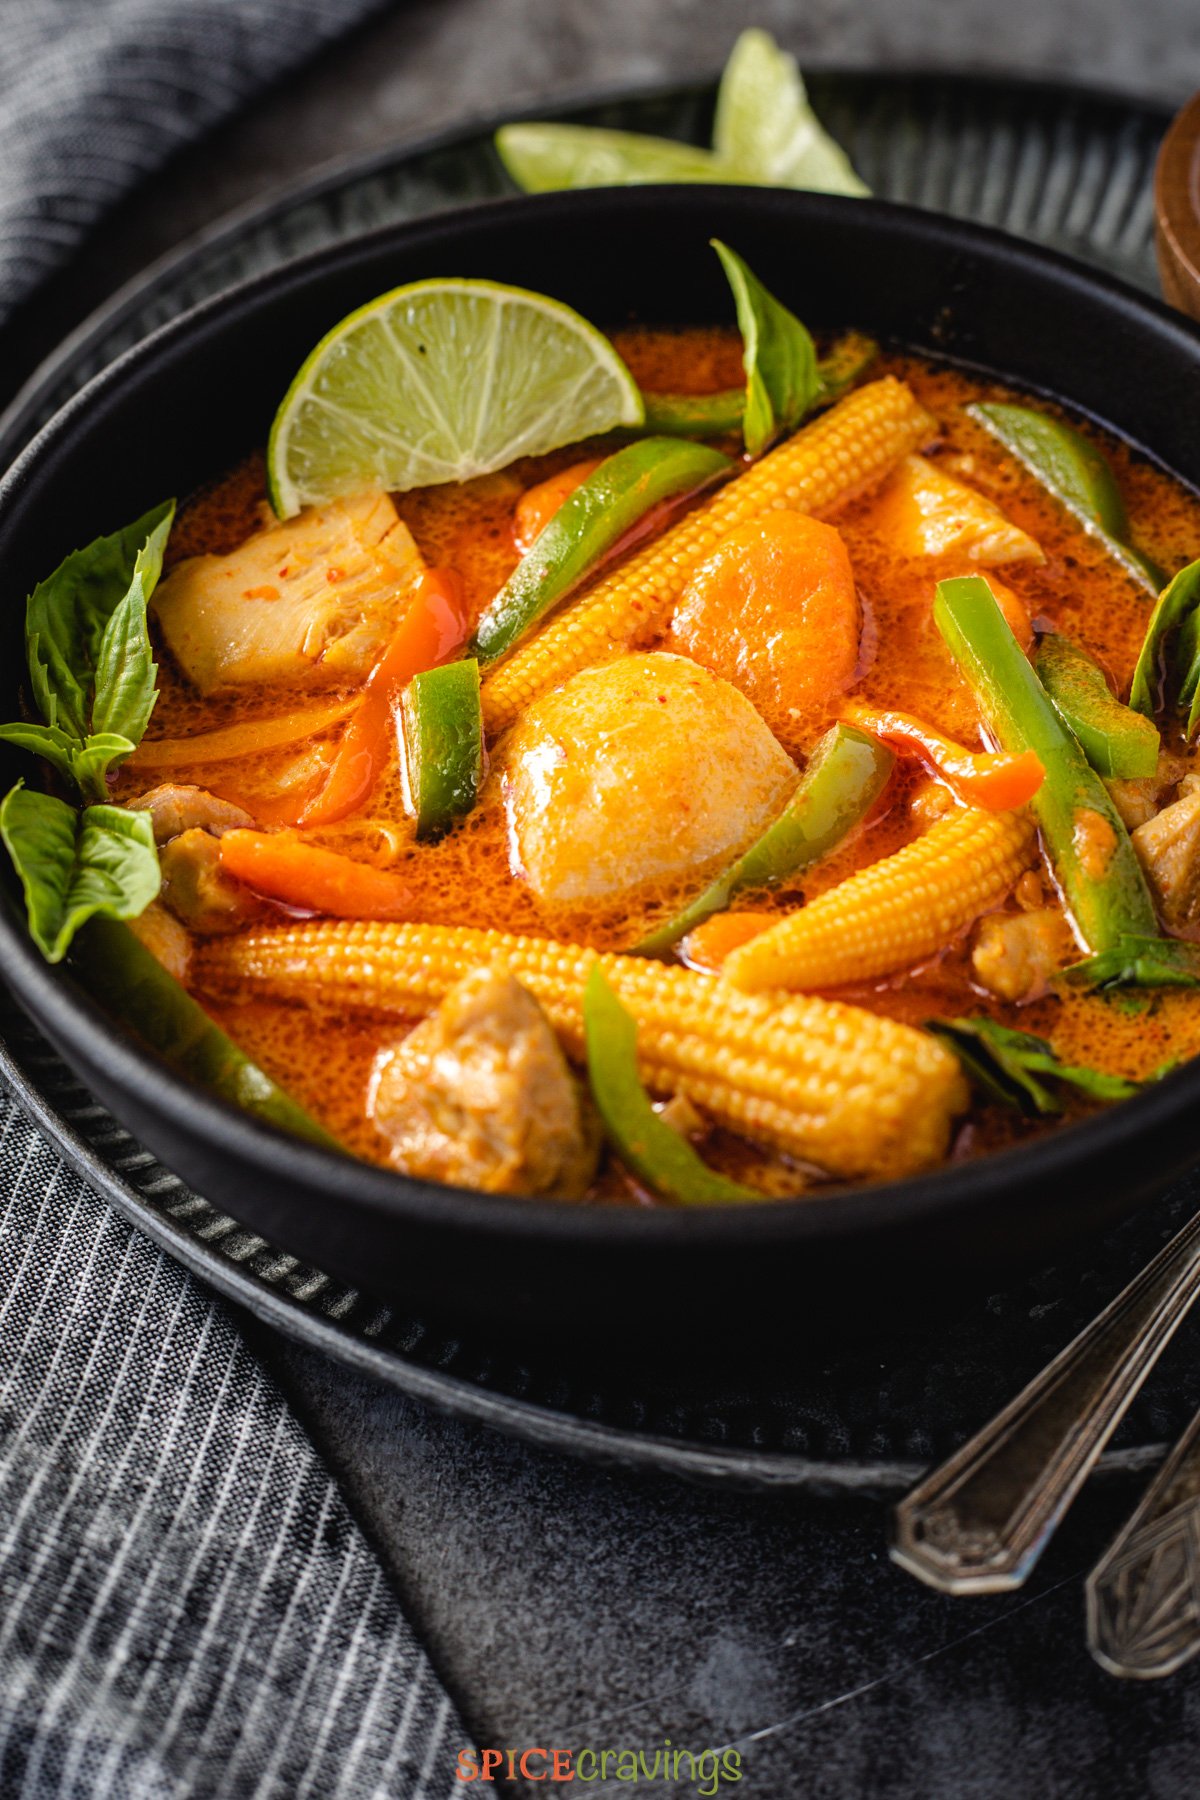 Thai Panang Curry with Chicken, baby corn, carrots, peppers, served in a black bowl